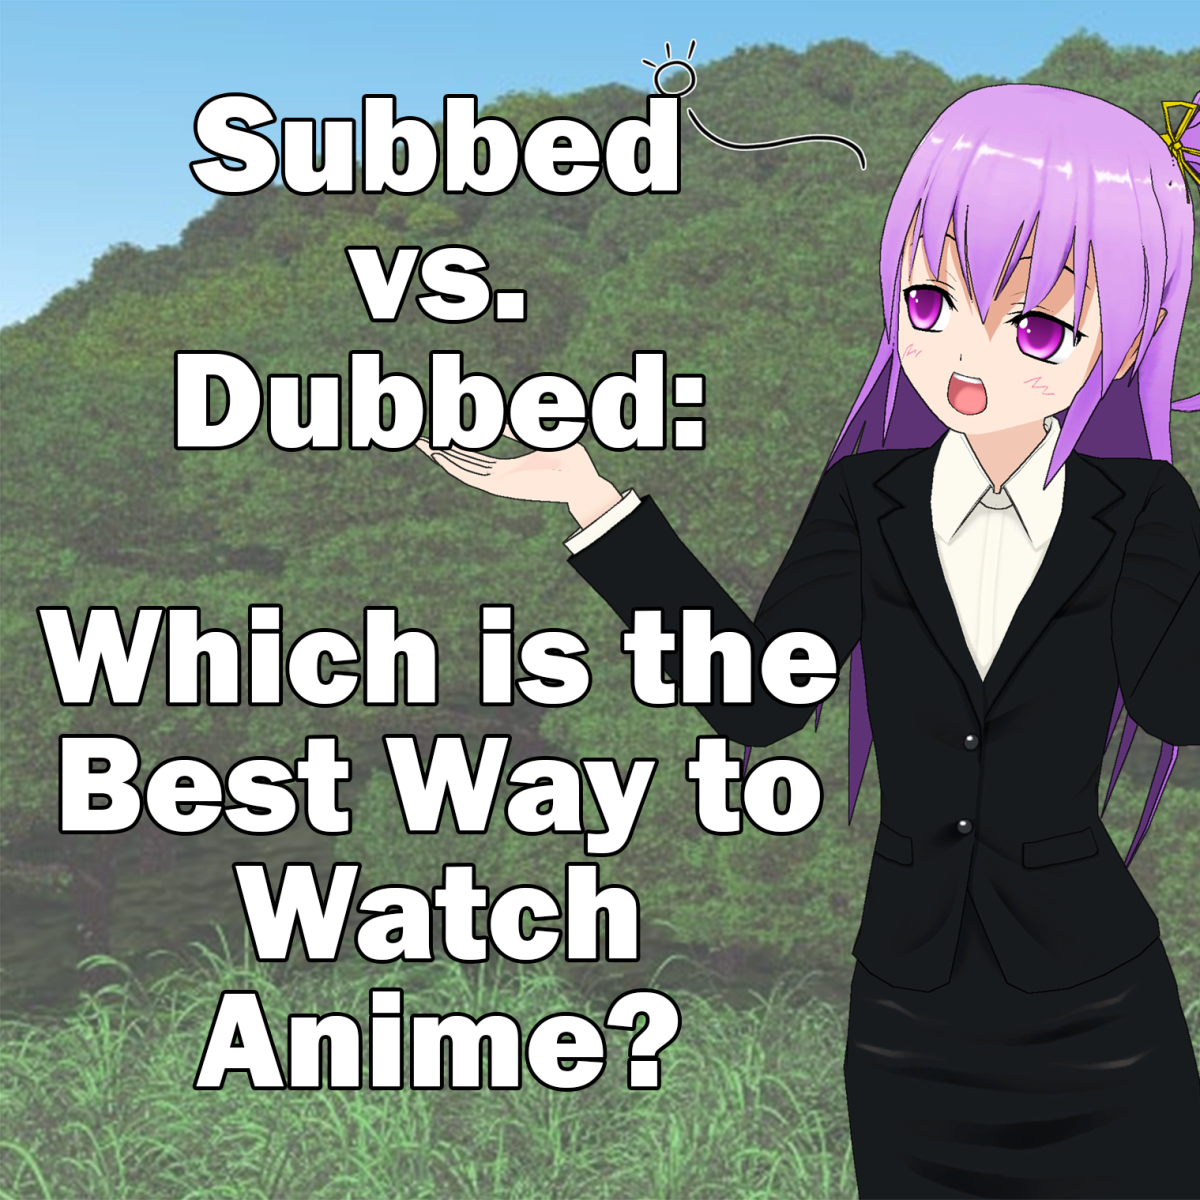 Are dubs or subs better when watching anime?